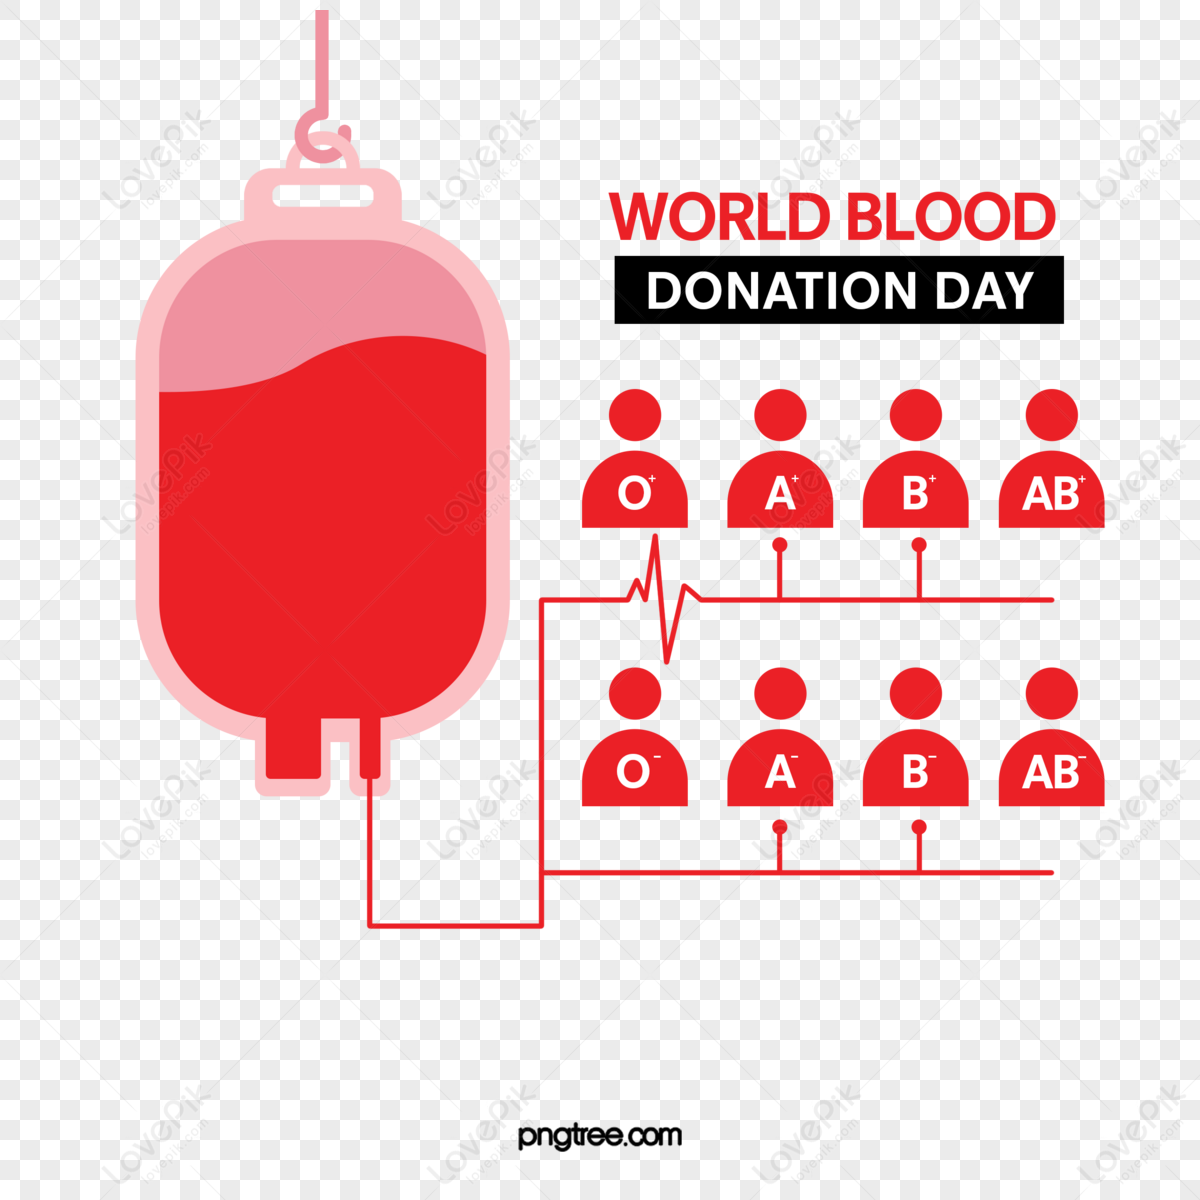 Blood Centre Seeks 0, A and B Rhesus Negative Donors – Blood Centre